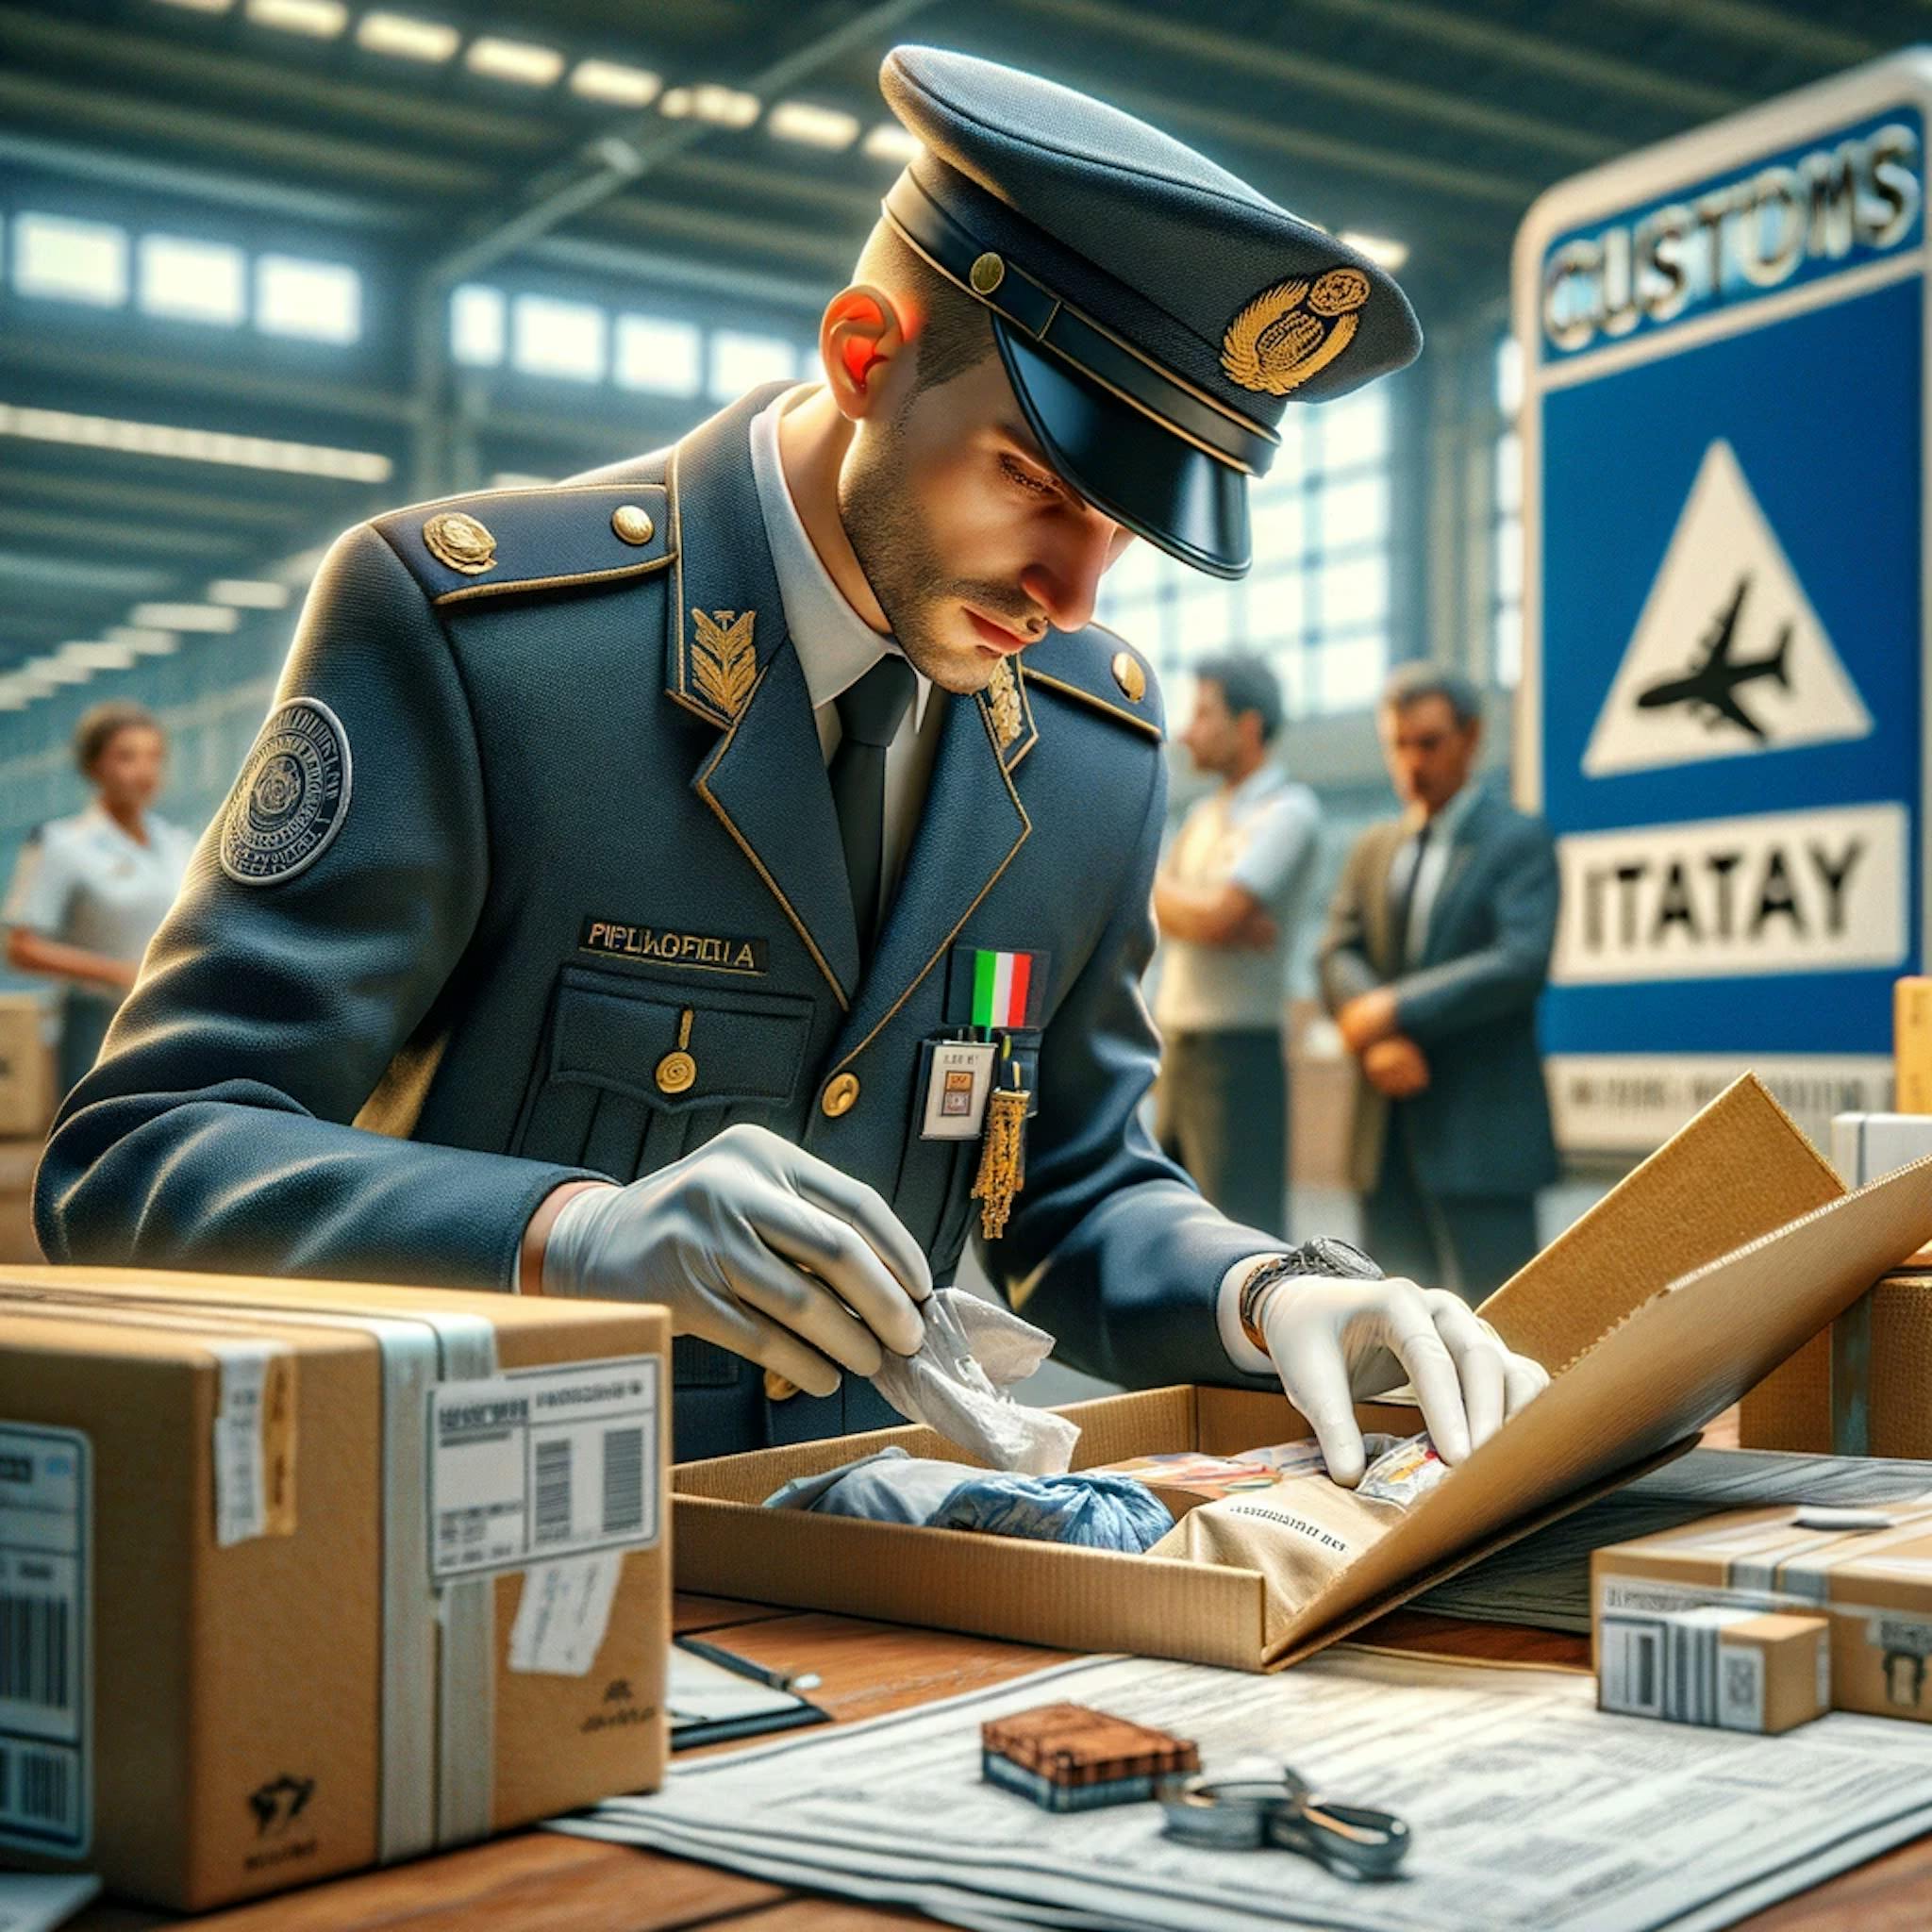 A customs officer inspecting a package that has been delivered to Italy. 